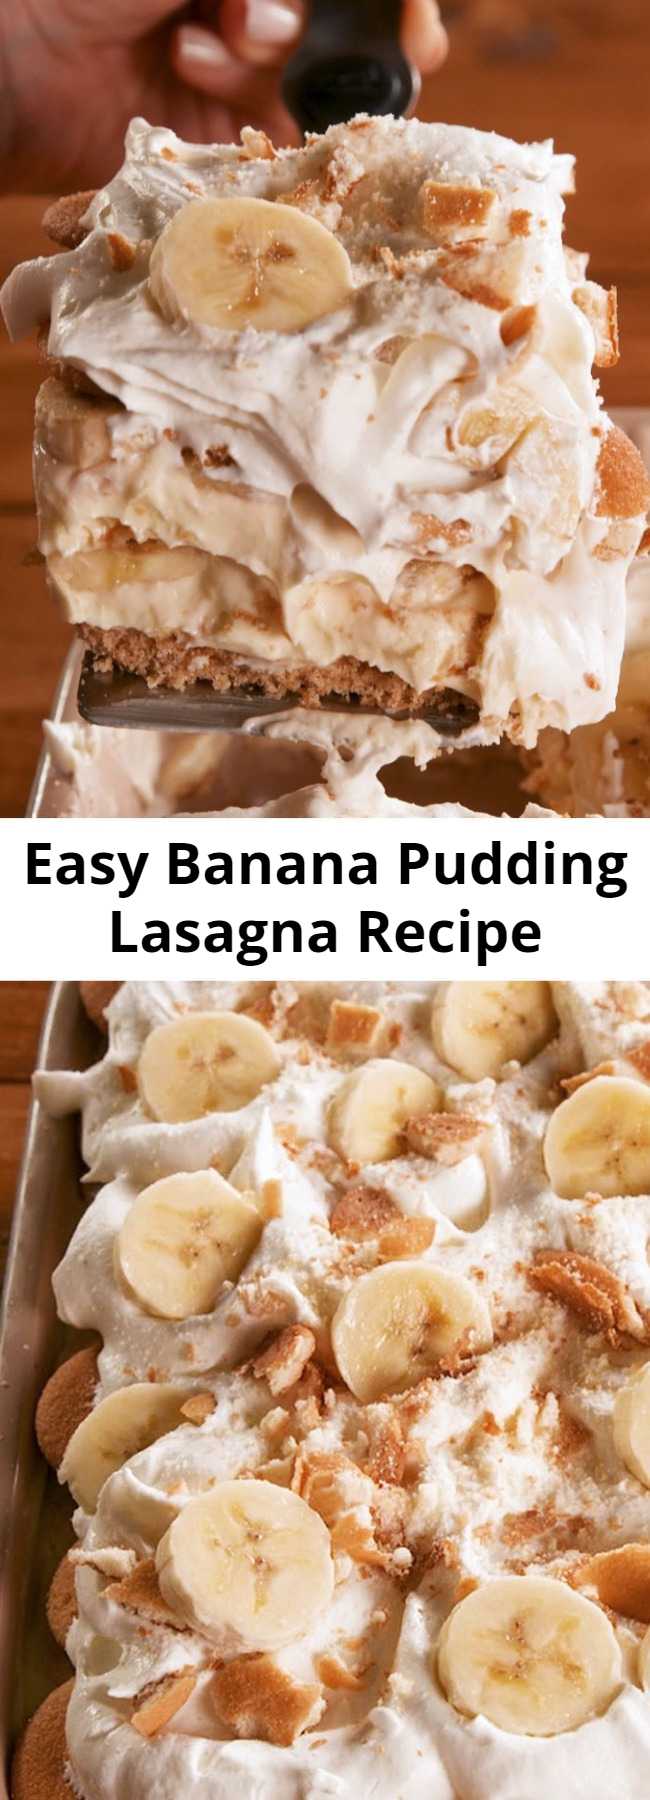 Easy Banana Pudding Lasagna Recipe - This banana pudding layered dessert is the perfect no-bake, make-ahead treat to make for a crowd. If you can find banana pudding flavored mix, go ahead and use it here. But vanilla is just as good. #recipe #easy #easyrecipes #banana #pudding #lasagna #dessert #fruit # whippedcream #nobake